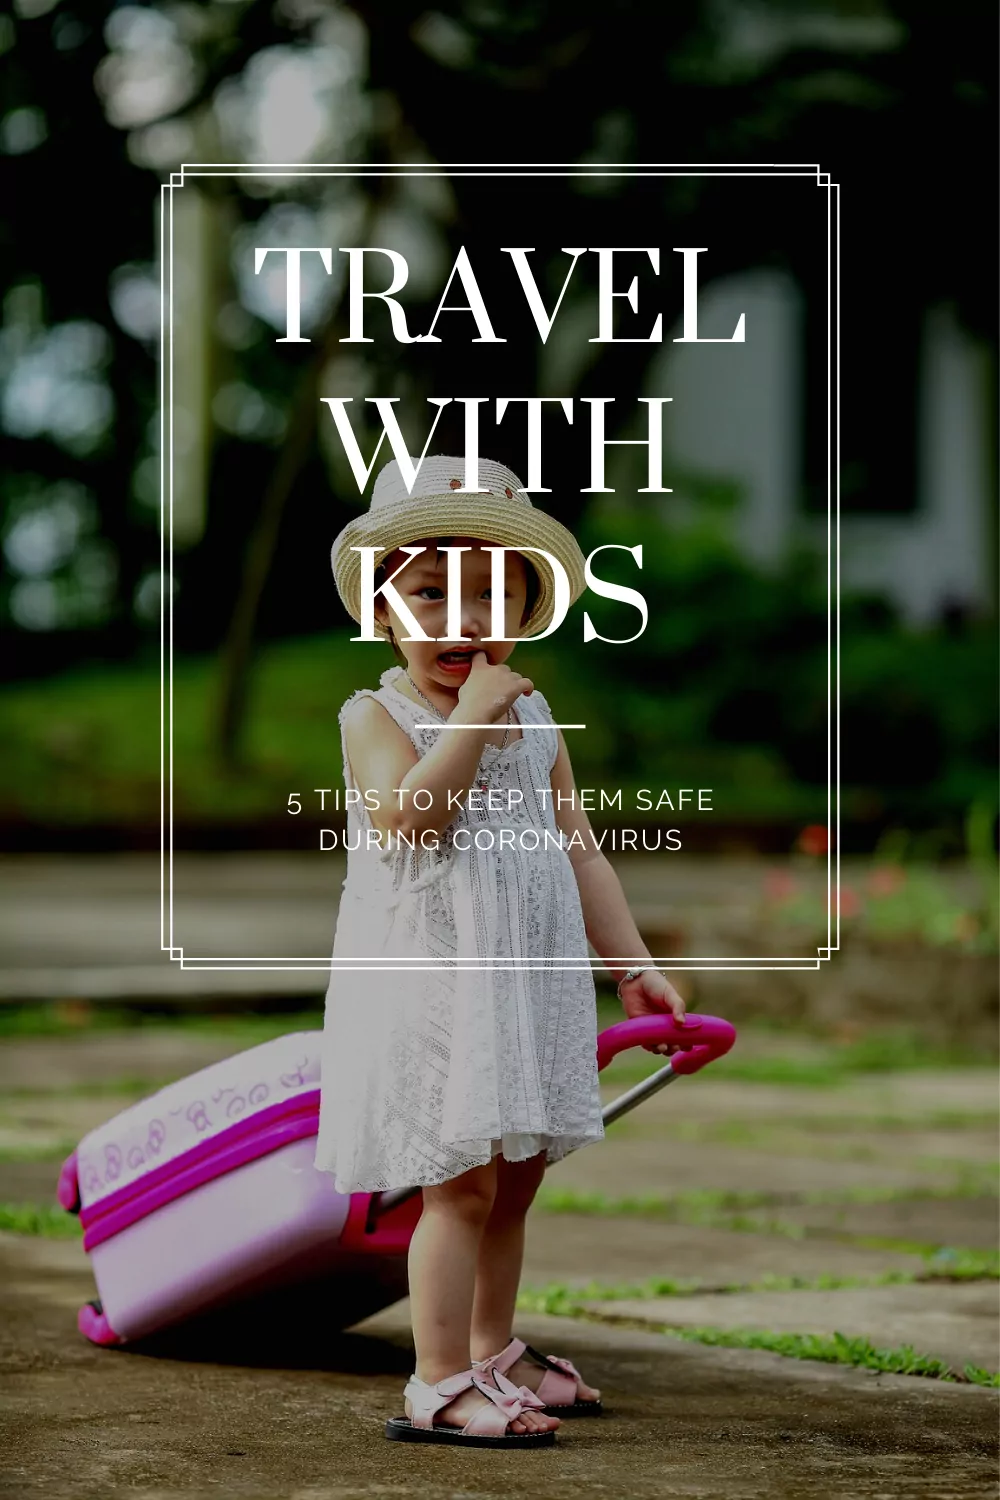 5 travel with kids tips to keep them safe during coronavirus pandemic on www.artsyfartzy.com